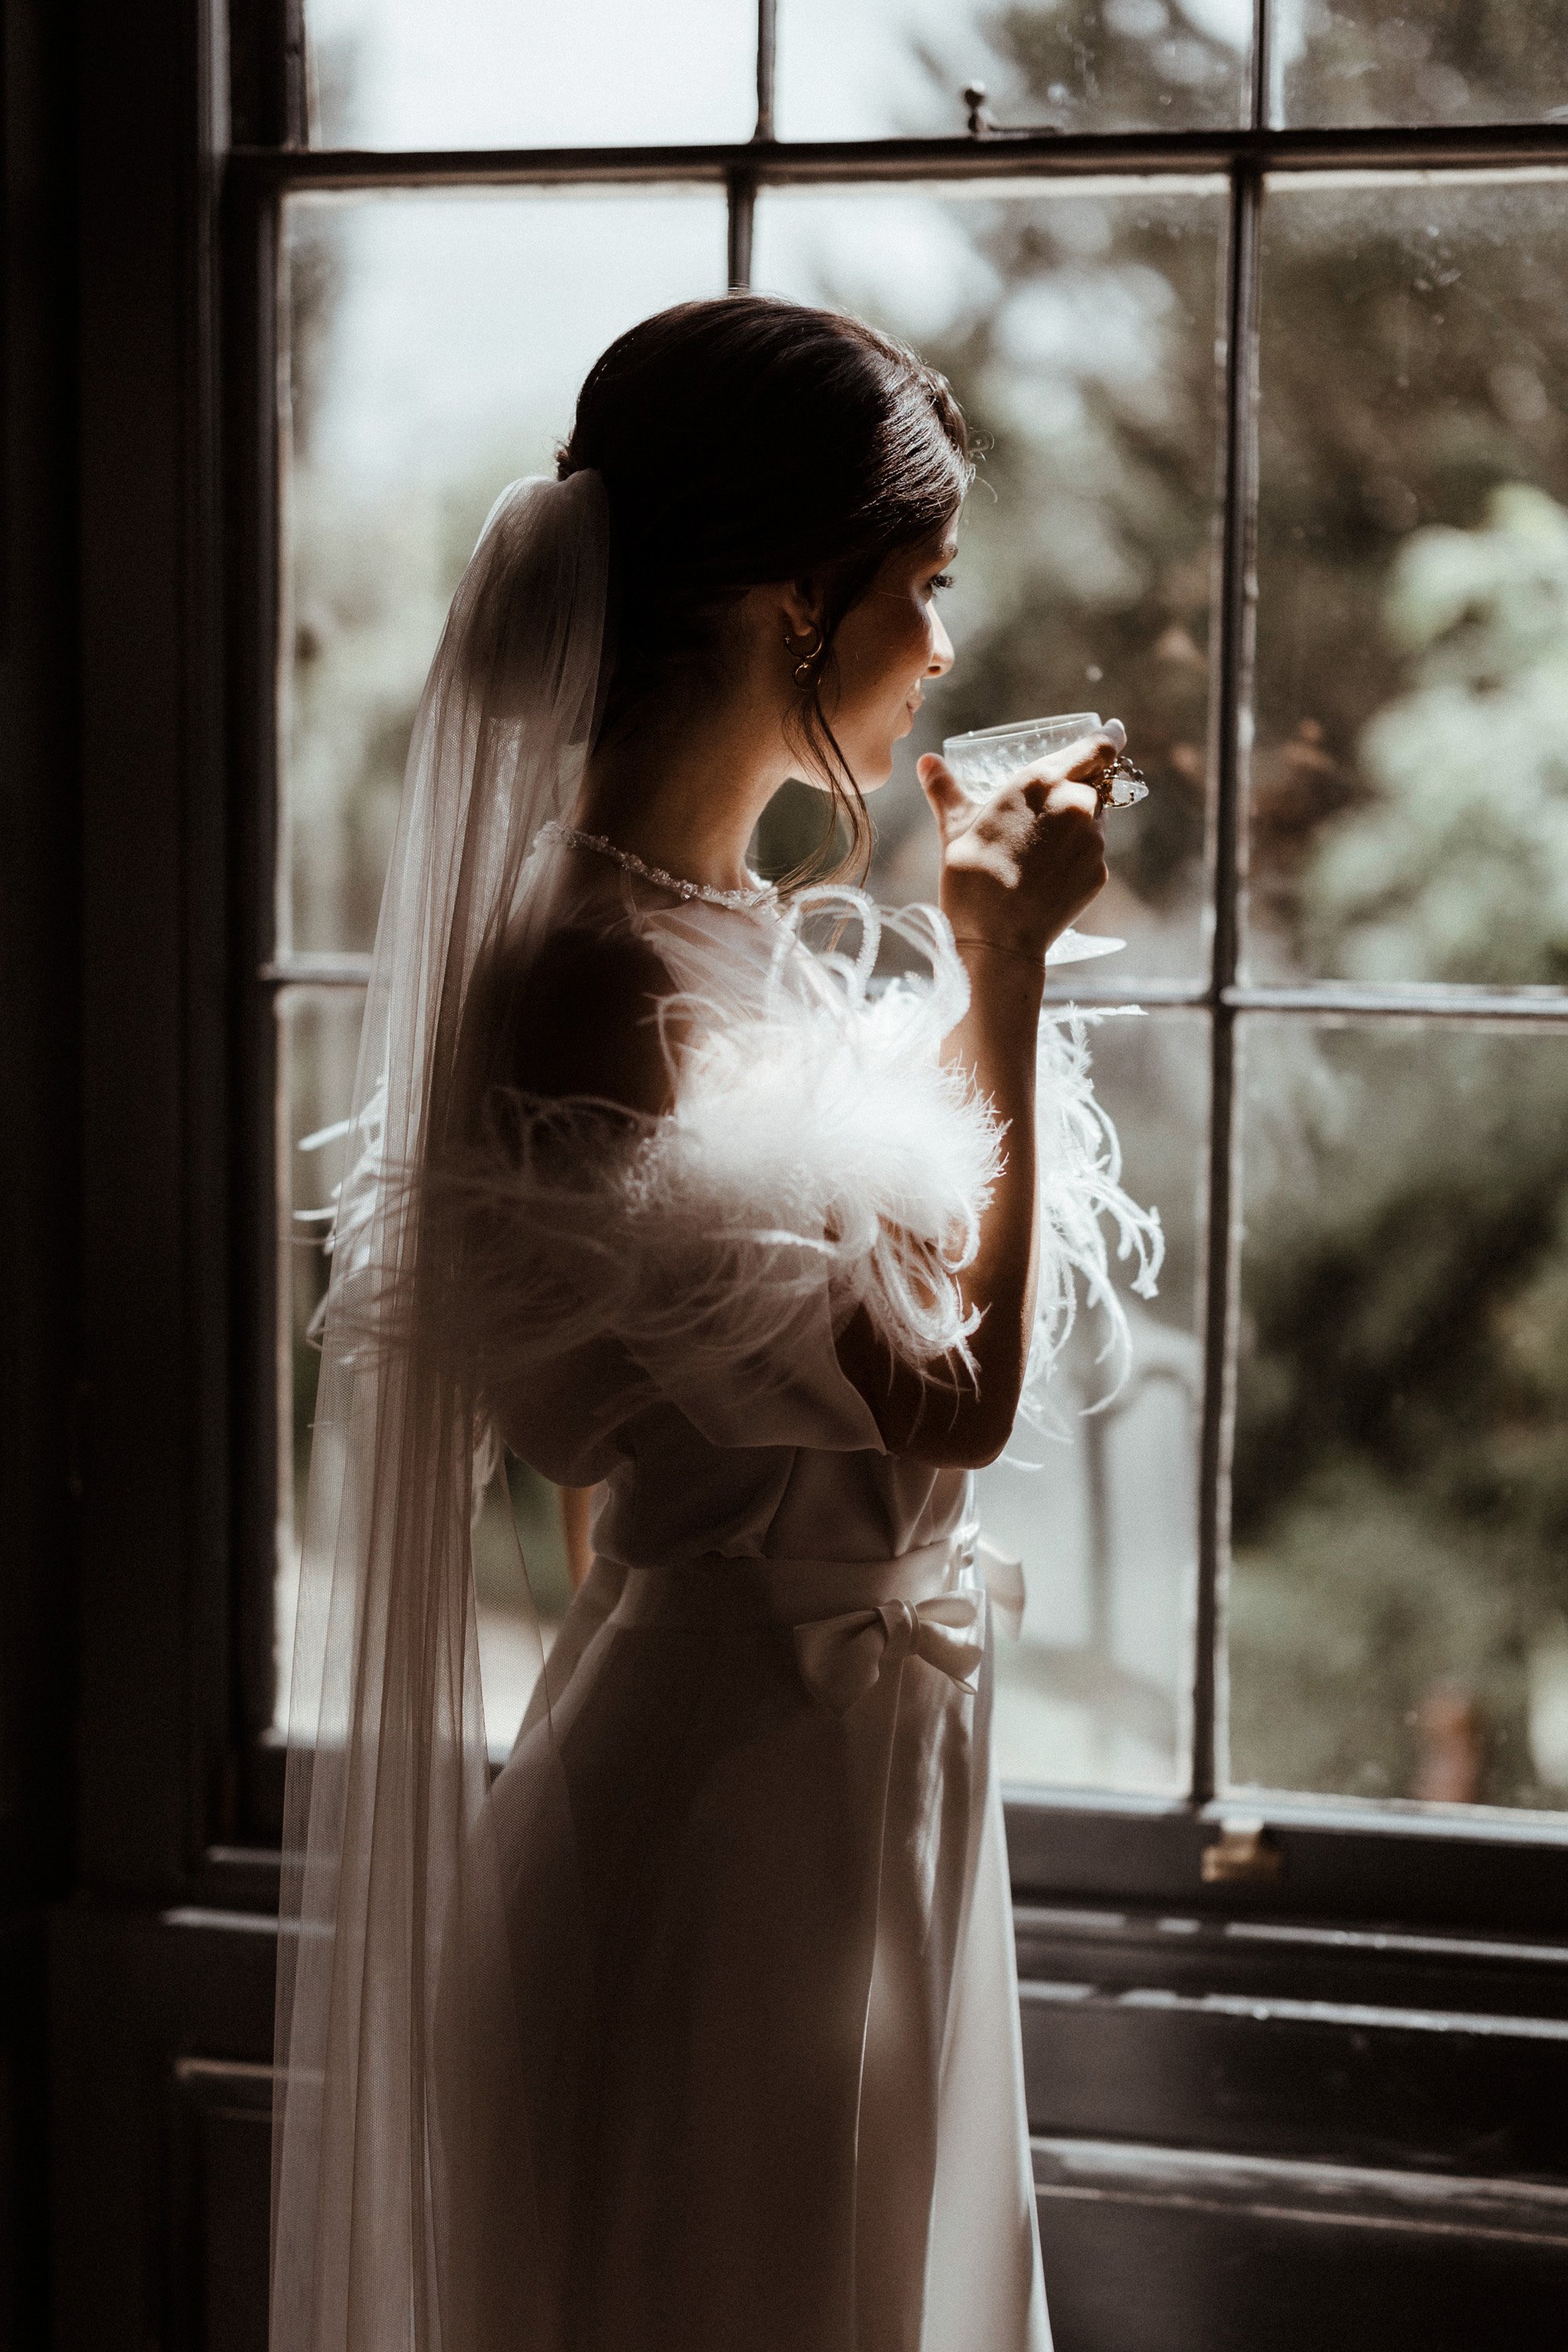 Vogue wedding inspiration bride with chignon and long veil in feathers looks out window of stately home holding crystal glass in this fine art modern wedding editorial